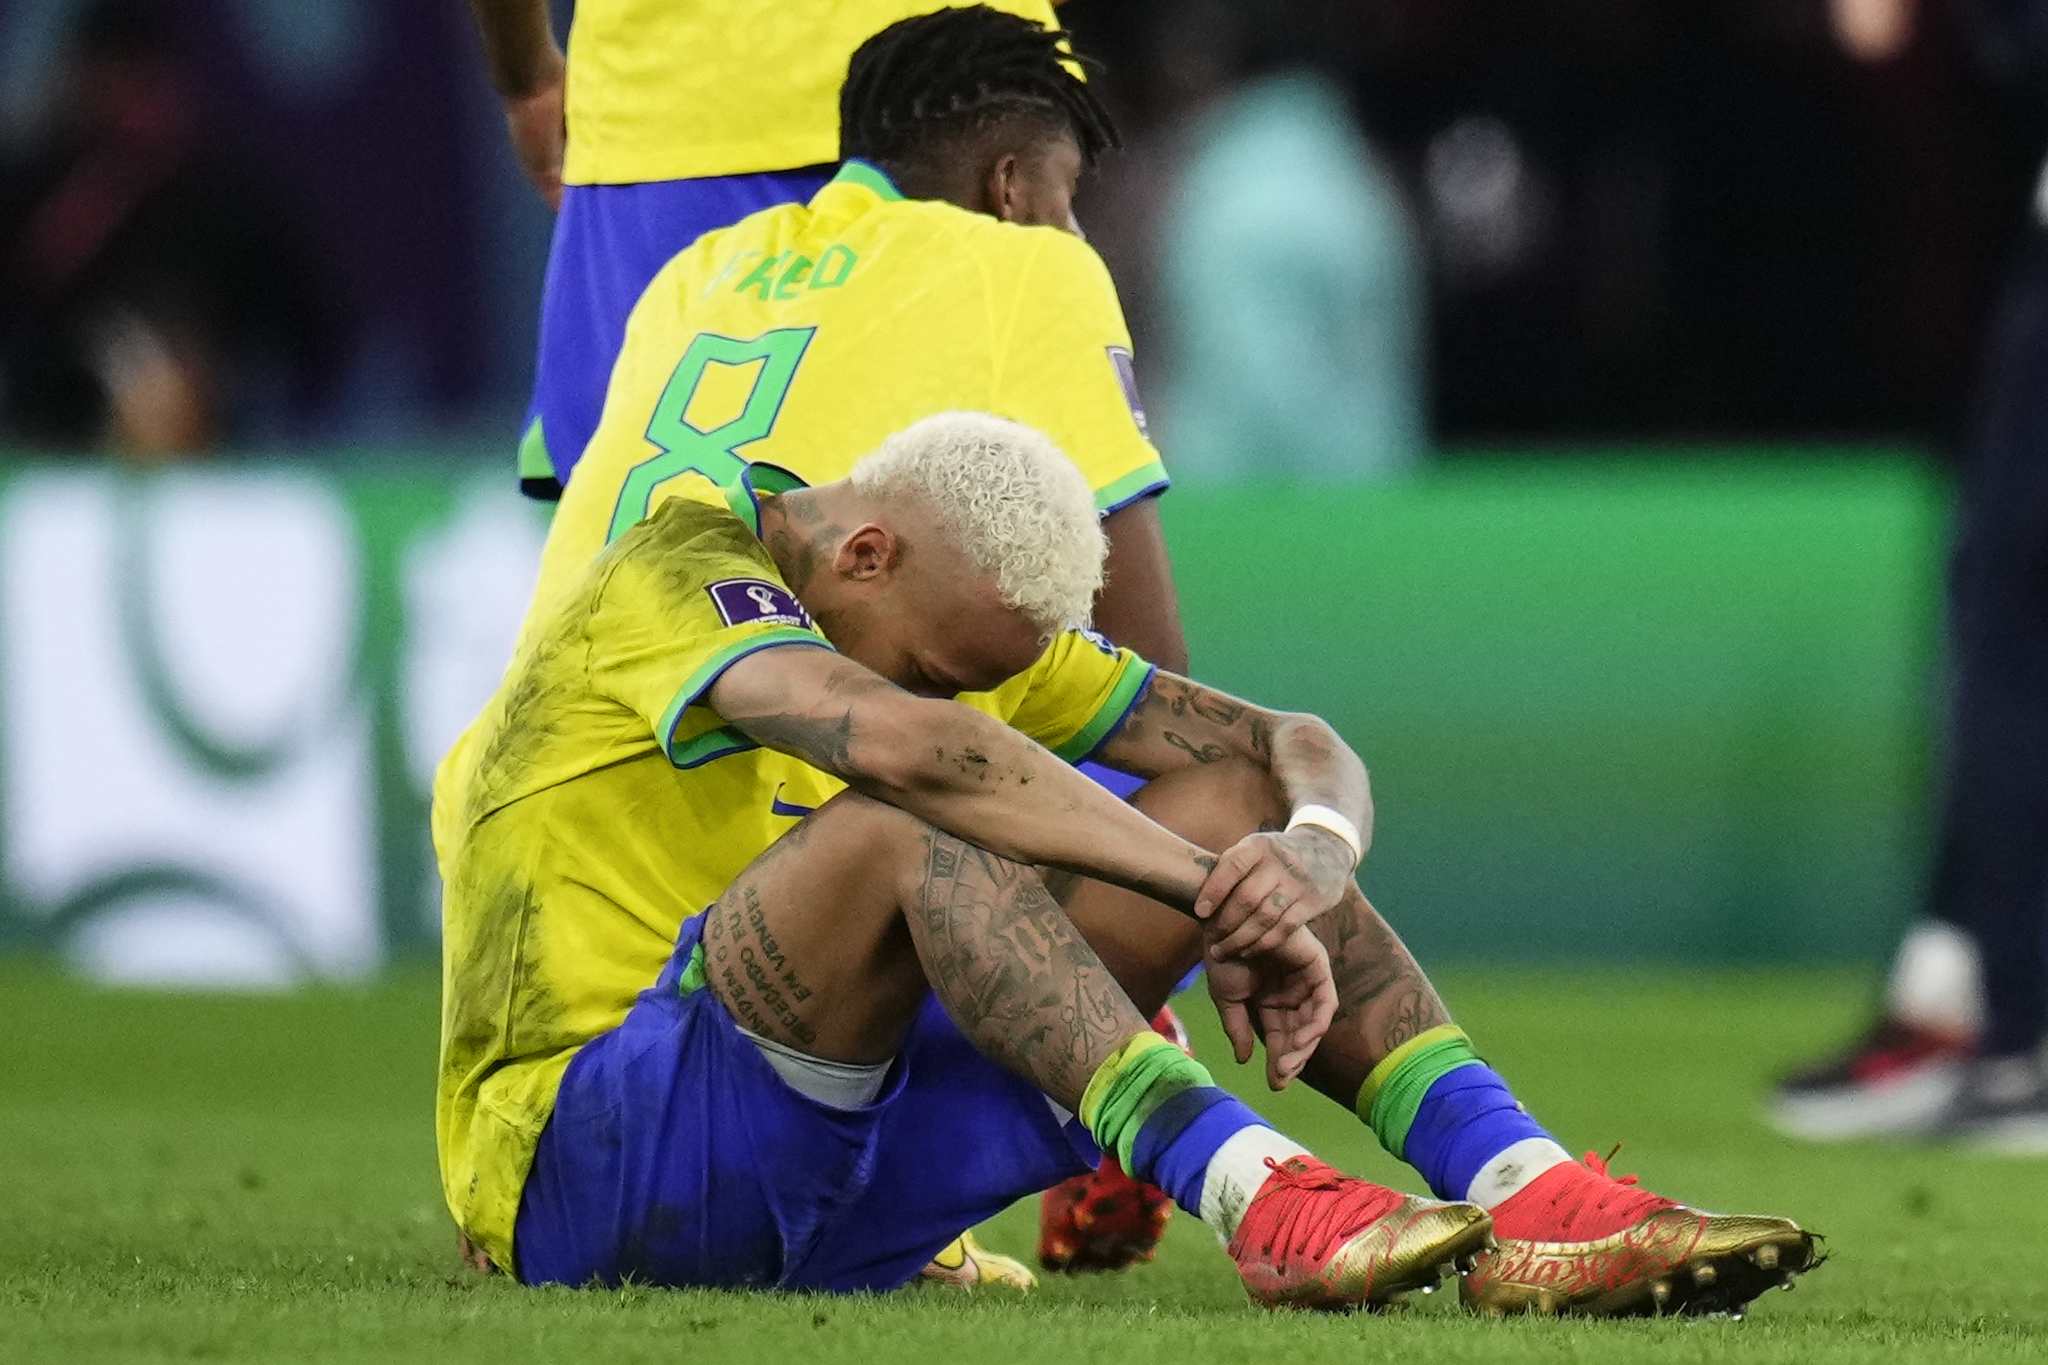 Brazil's Neymar sits on the pith after his side lost in a penalty shootout the World Cup quarterfinal soccer match between  lt;HIT gt;Croatia lt;/HIT gt; and Brazil, at the Education City Stadium in Al Rayyan, Qatar, Friday, Dec. 9, 2022. (AP Photo/Manu Fernandez)